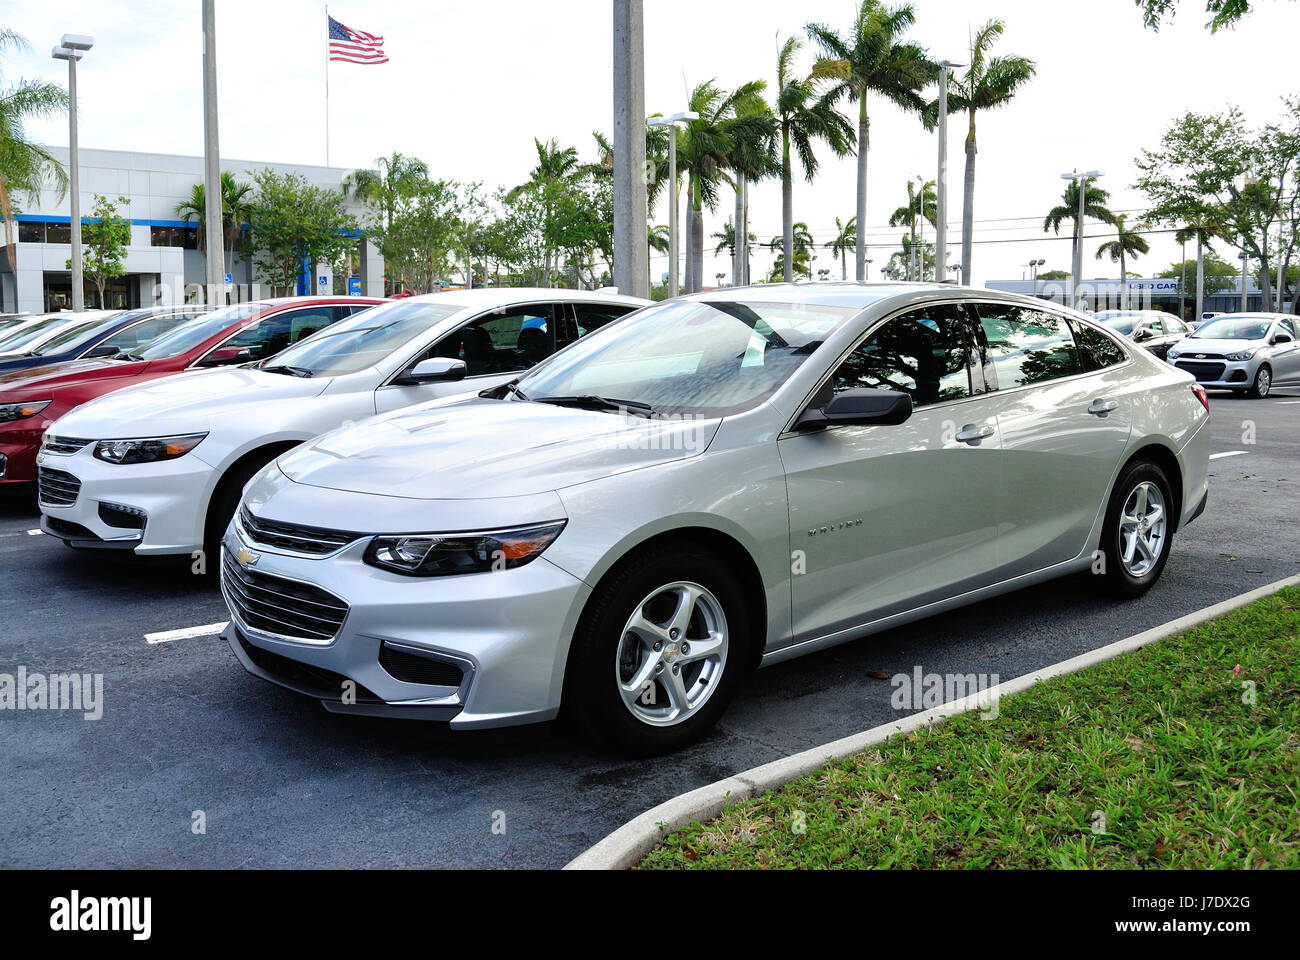 New Chevrolet Malibu lined up on the lot ready to be sold. Grieco Chevrolet Fort Lauderdale Florida May 23 2017. Chevrolet is a division of General Mo Stock Photo